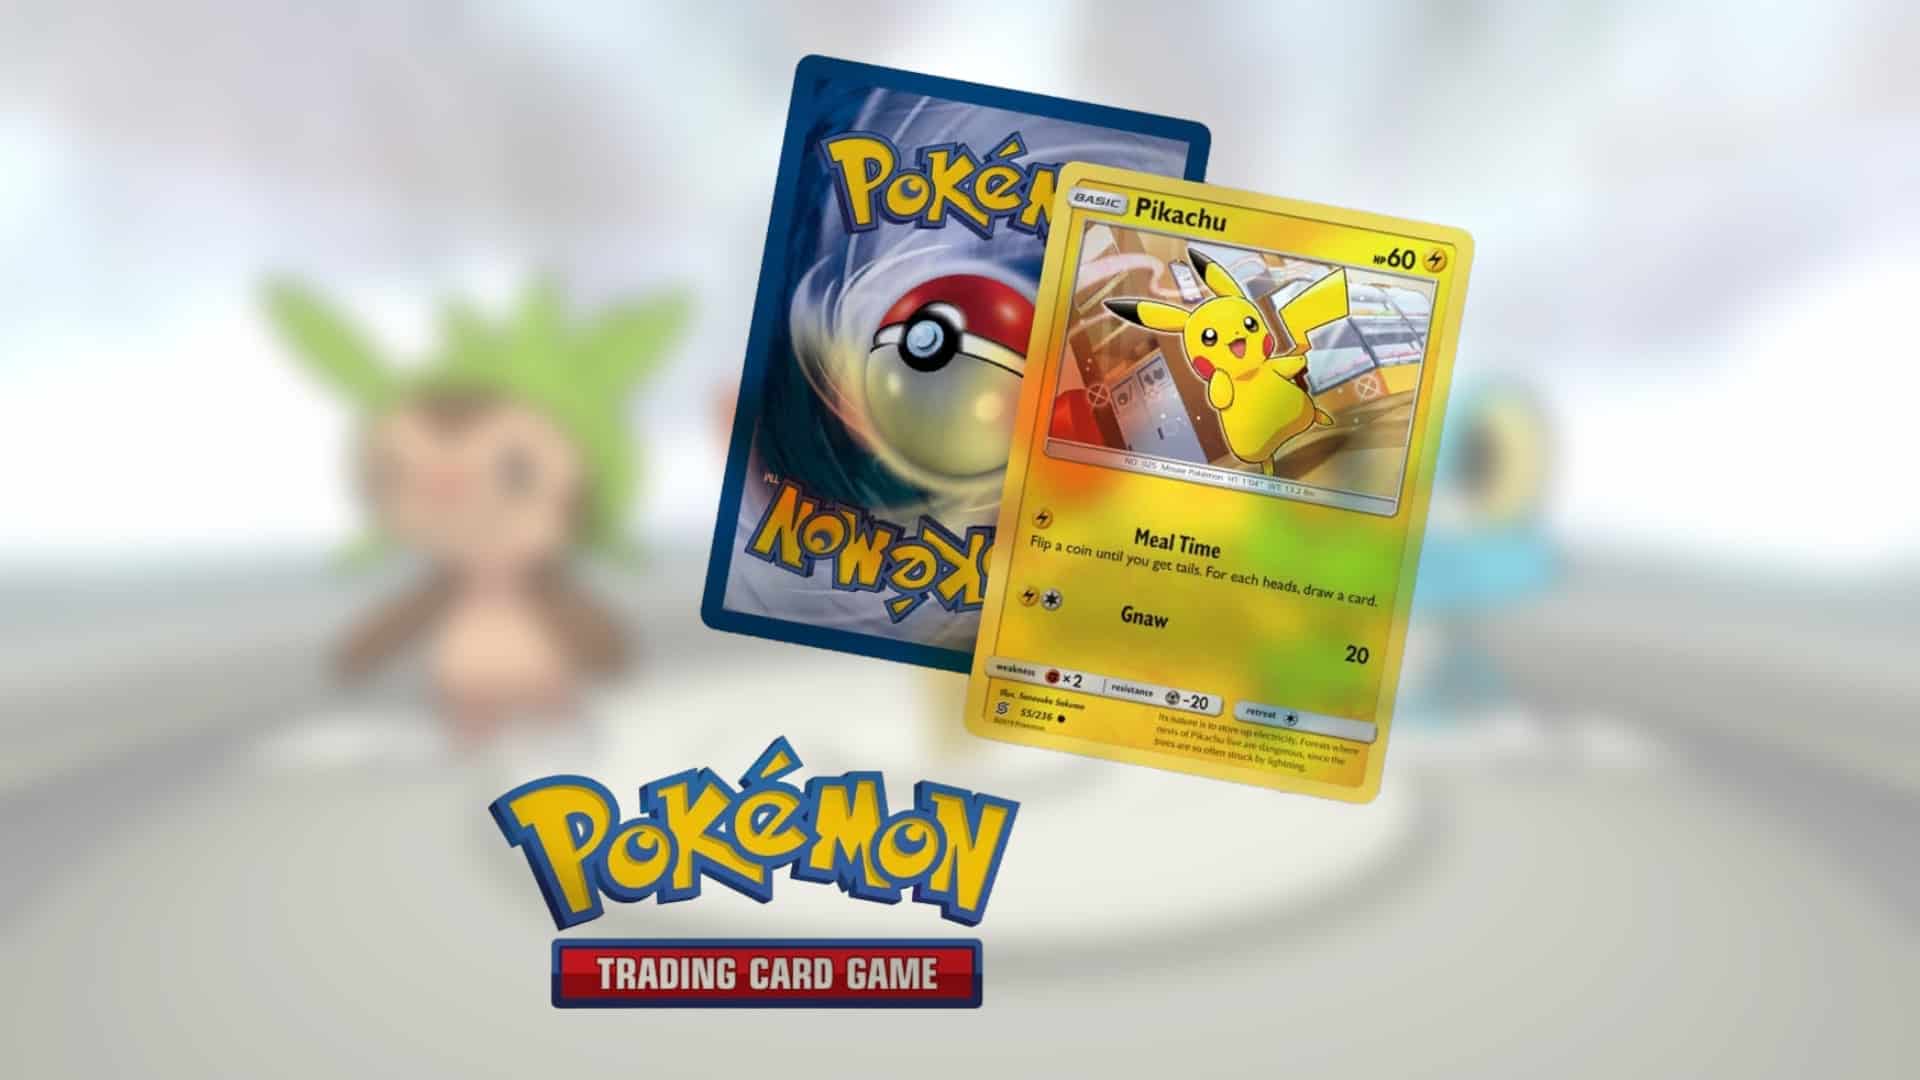 The official logo of Pokemon: Trading Card Game and an in-game screenshot from Pokemon X.